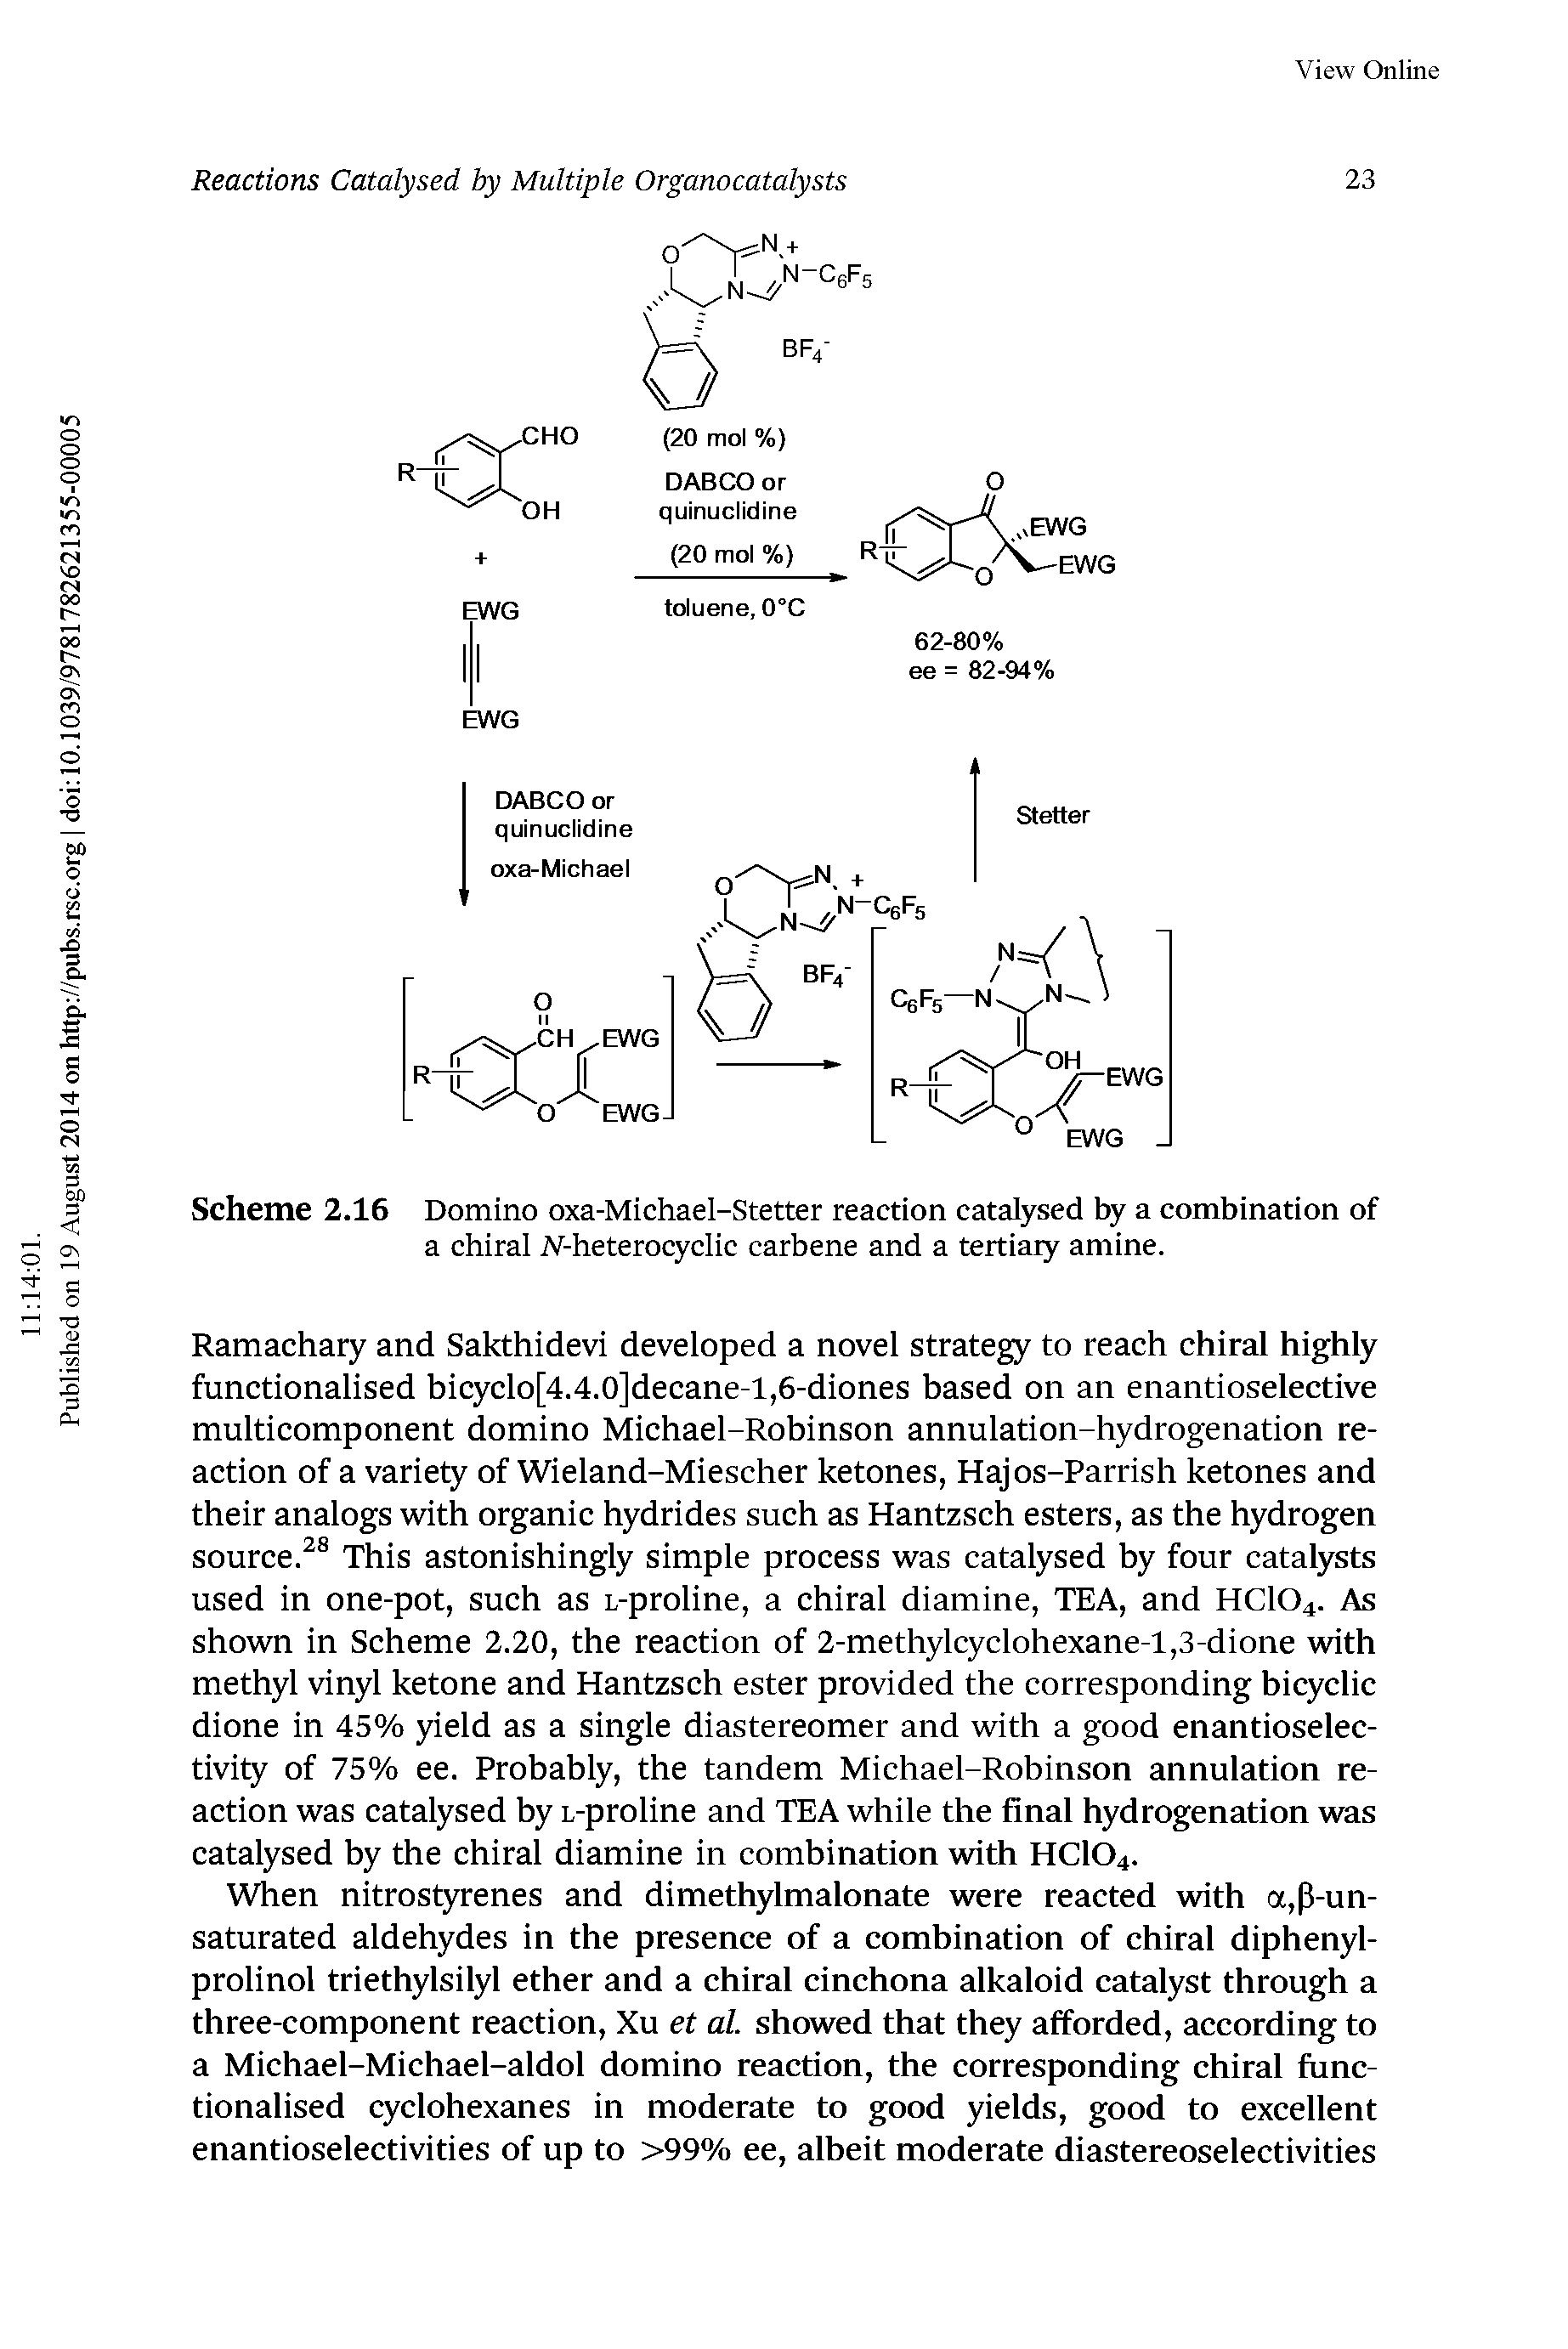 Scheme 2.16 Domino oxa-Michael-Stetter reaction catalysed by a combination of a chiral iV-heterocyclic carbene and a tertiaiy amine.